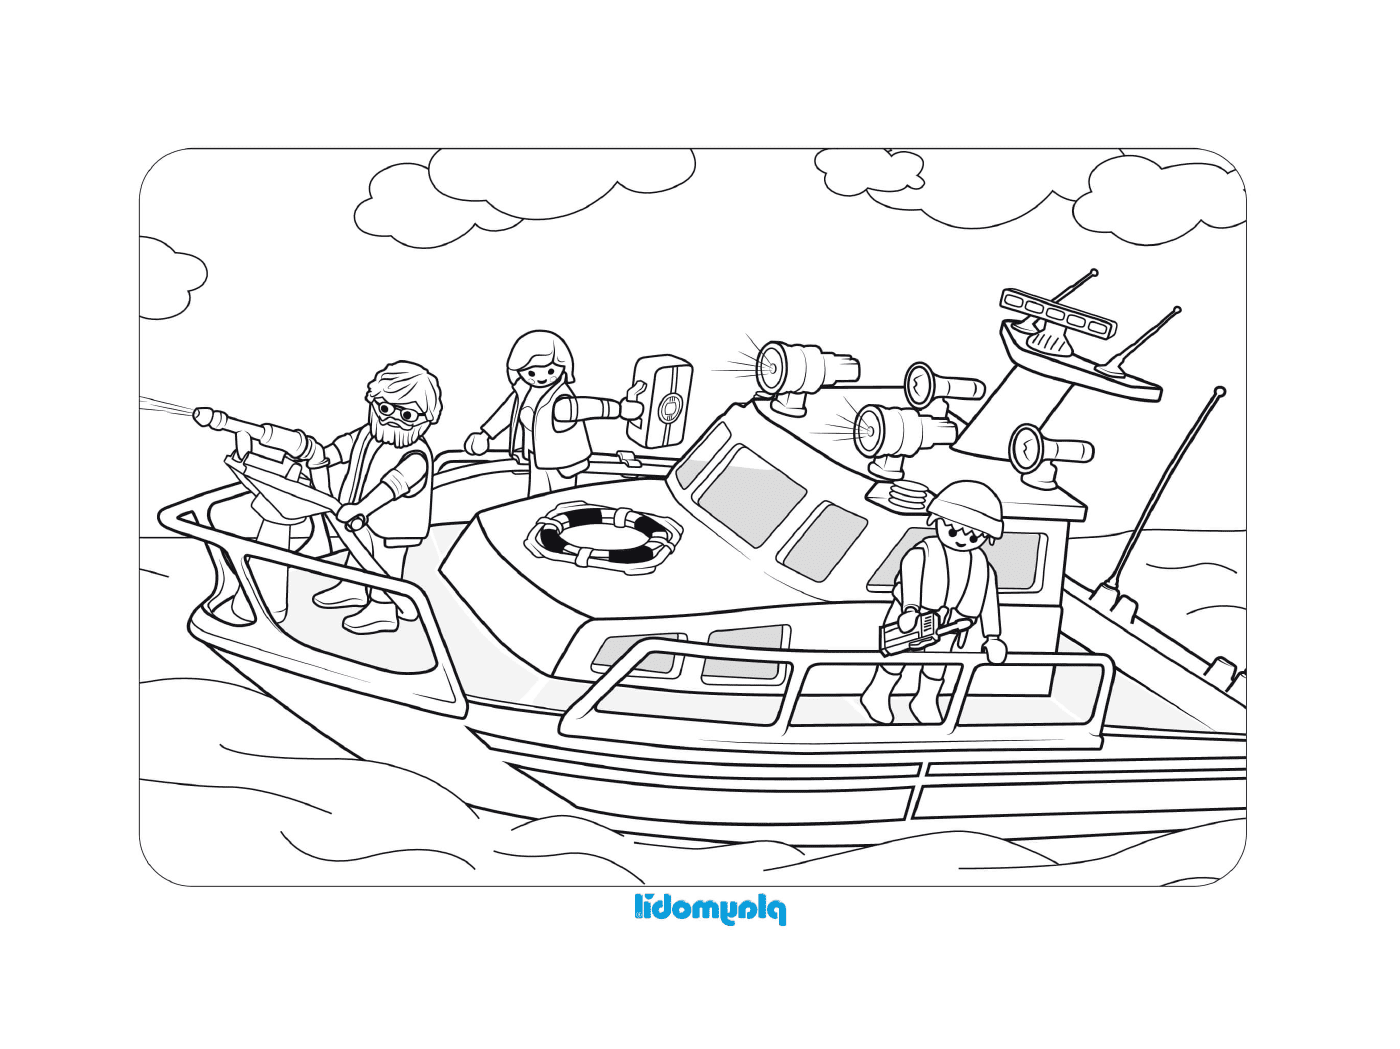  Boat with people on board 